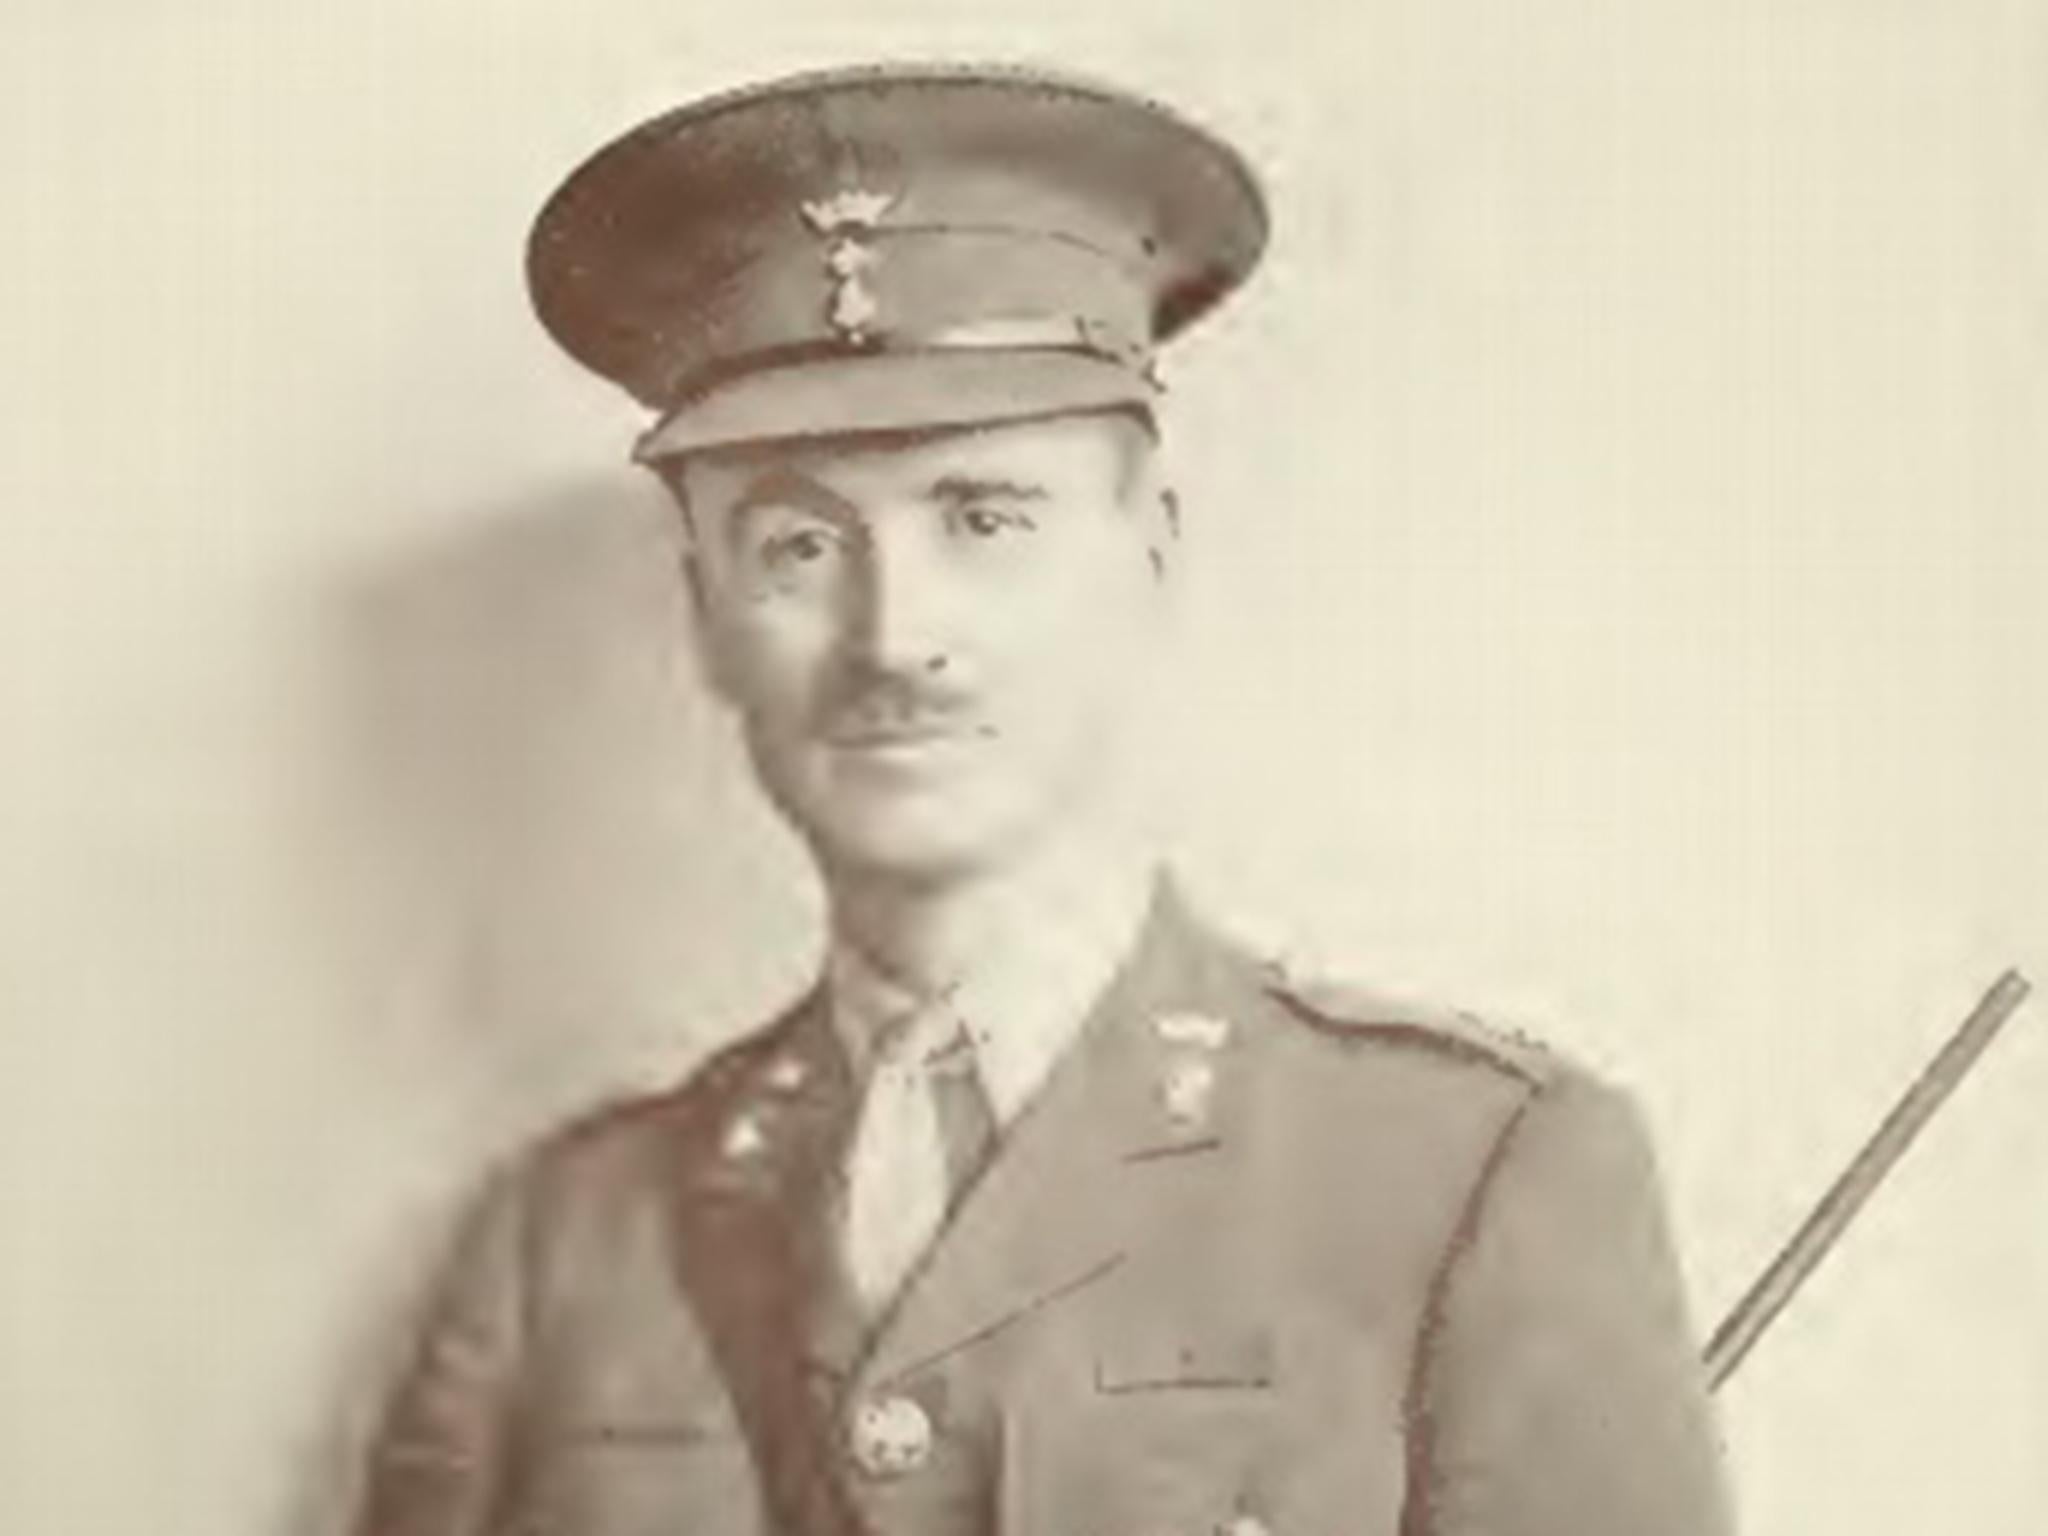 Lt Col James Henry Patterson became an advocate for Zionism after witnessing the bravery of Jewish soldiers in World War One